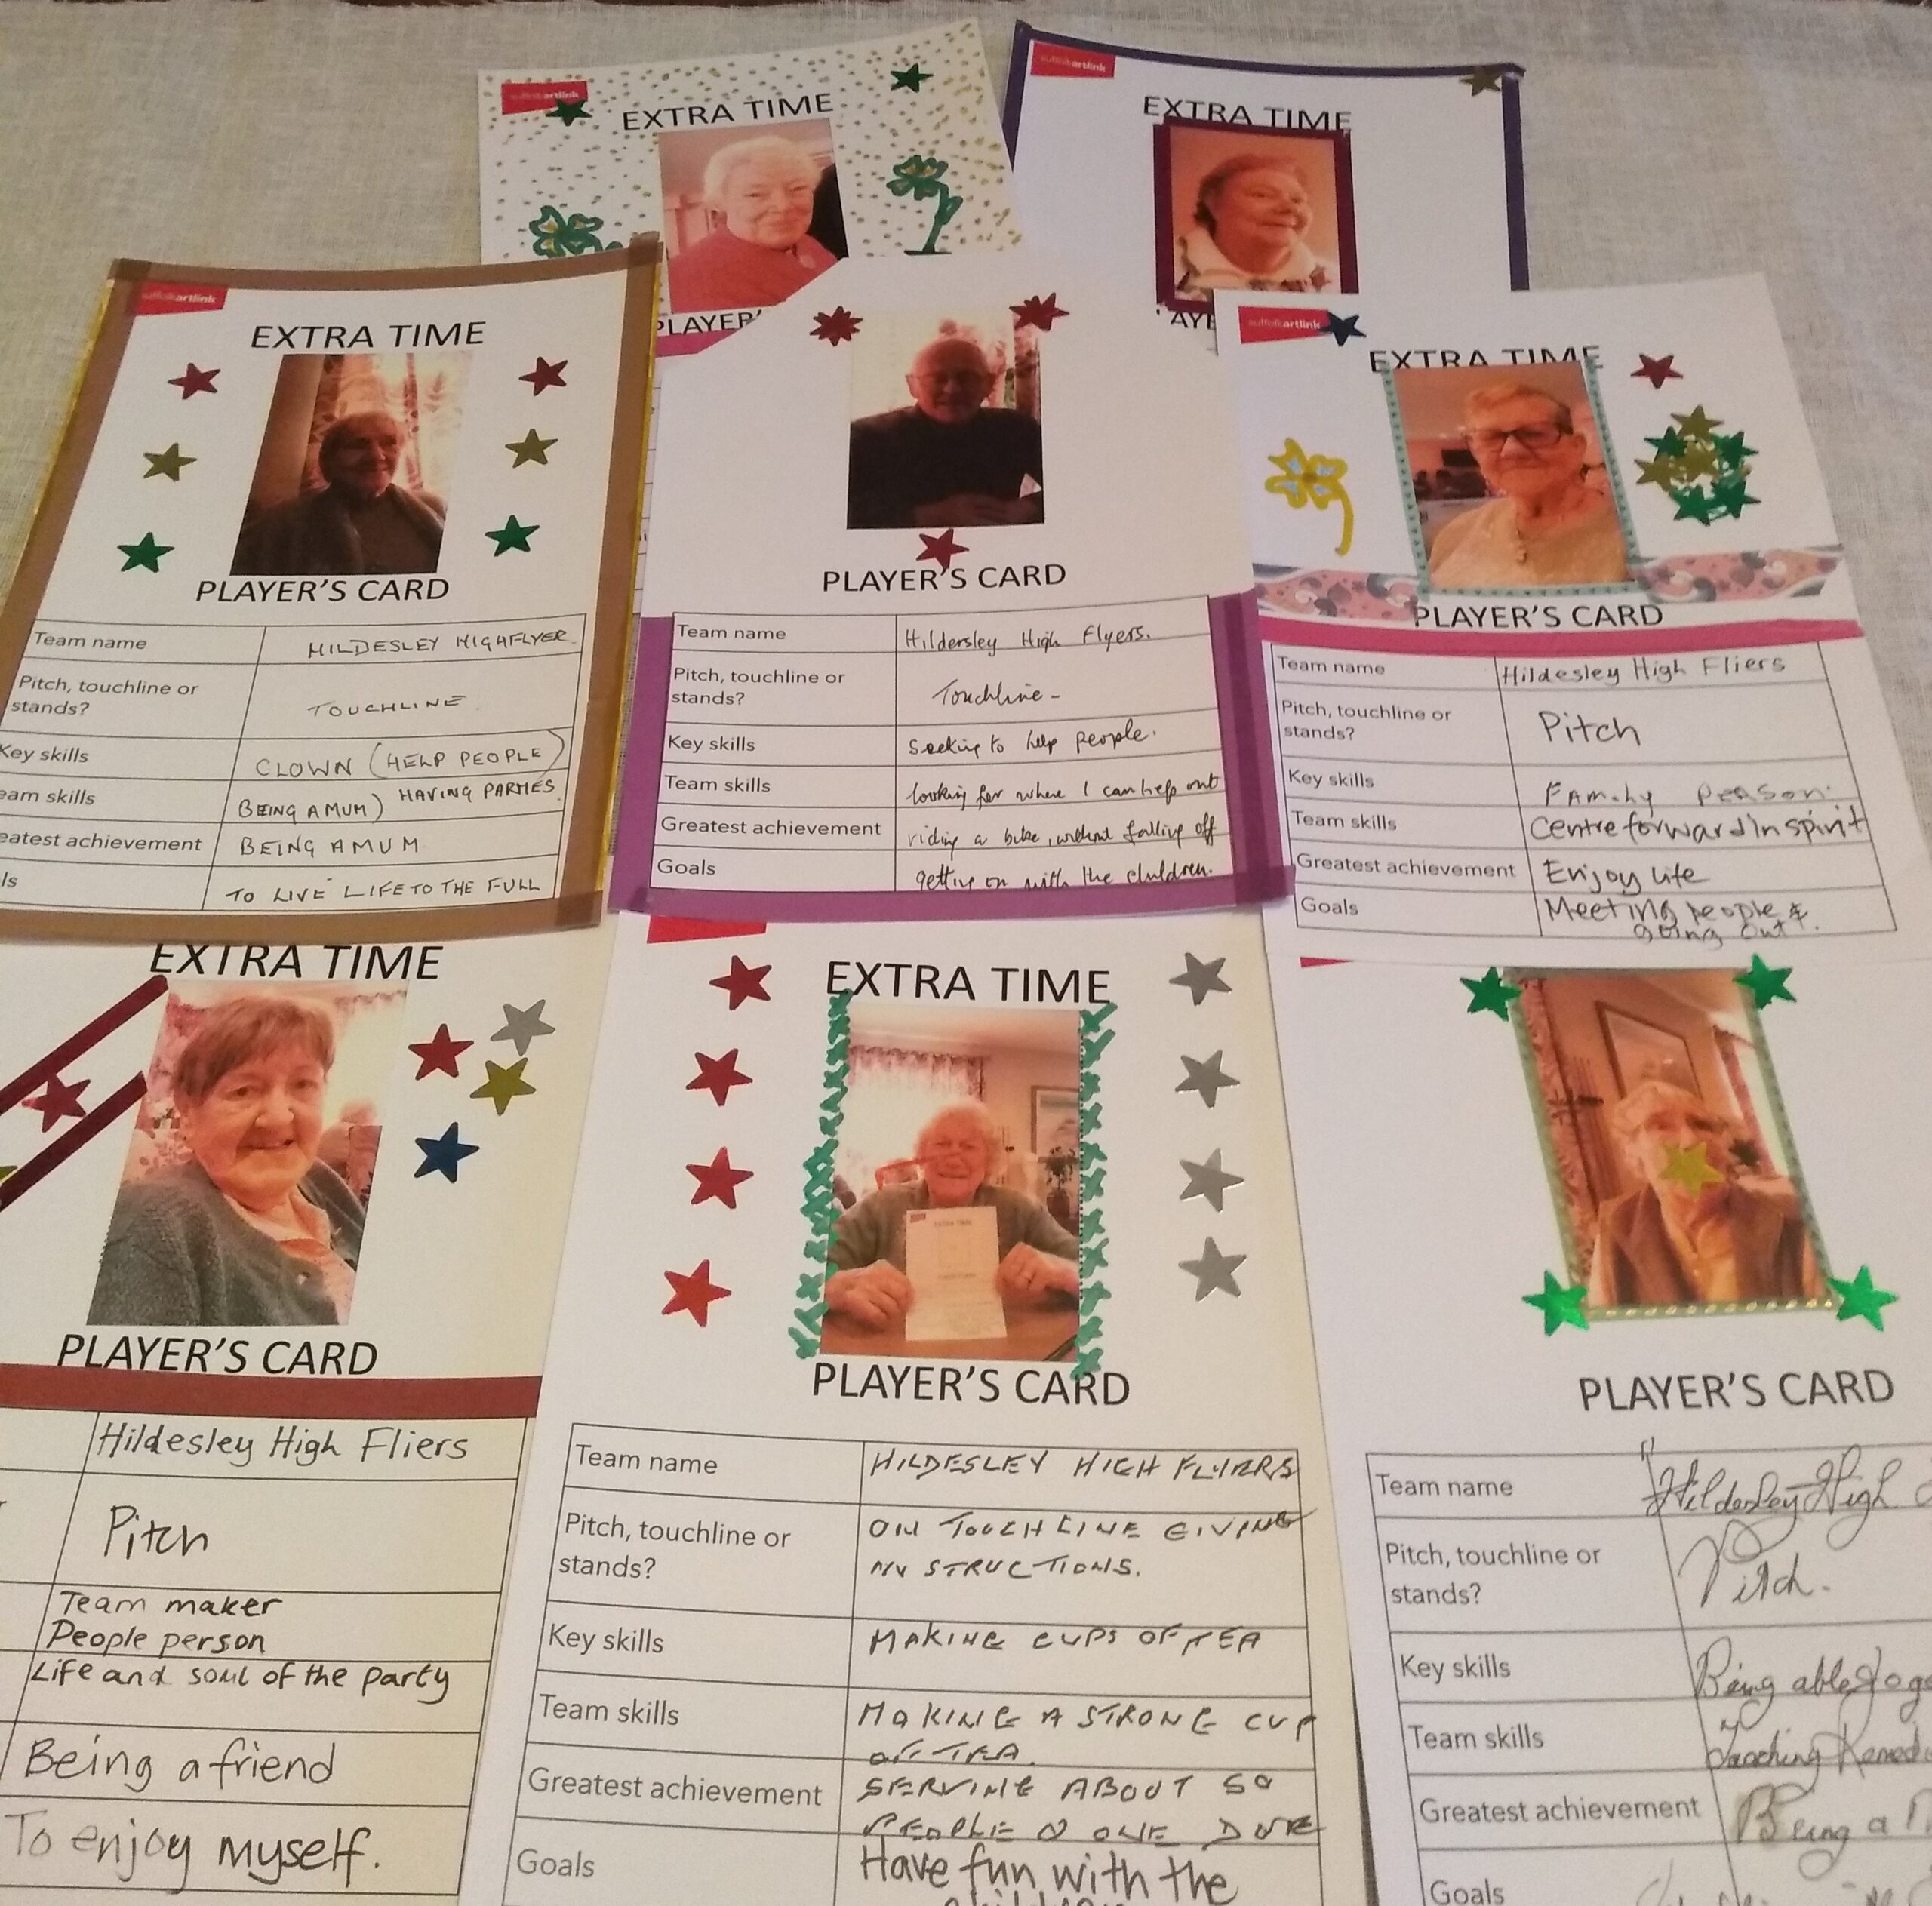 A collection of cards, each with a photograph of an adult and lists of skills, achievements and goals